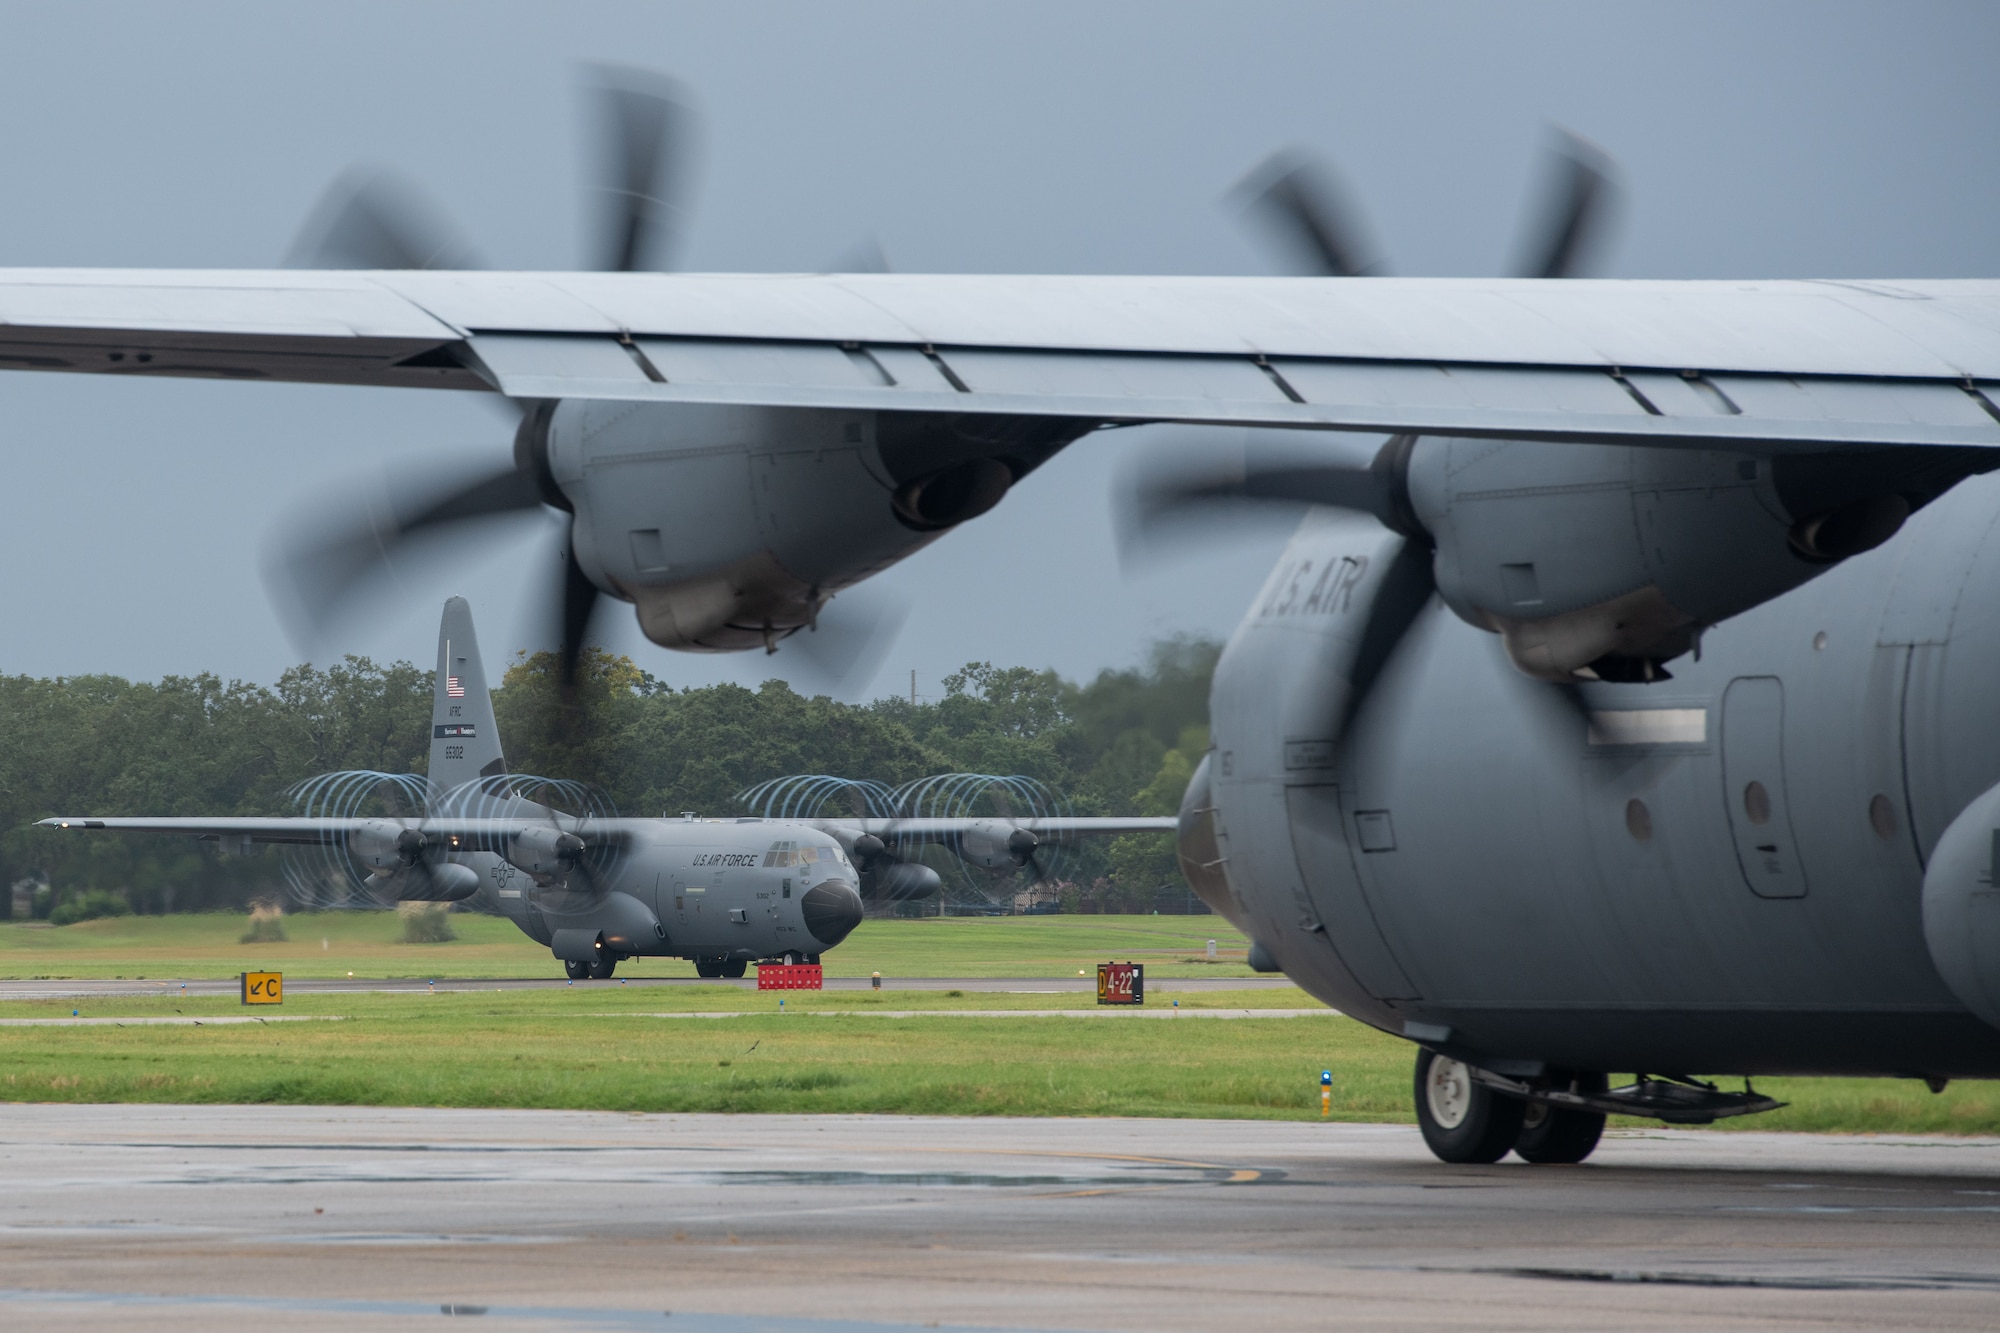 A WC-130J assigned to the 53rd Weather Reconnaissance Squadron at Keesler Air Force Base, Miss., takes off as a C-130J assigned to the 815th Airlift Squadron taxis to takeoff Aug. 27, 2021. Both squadrons evacuated to Kelly Field in San Antonio Texas ahead of anticipated Hurricane Ida. (U.S. Air Force by Staff Sgt. Kristen Pittman)